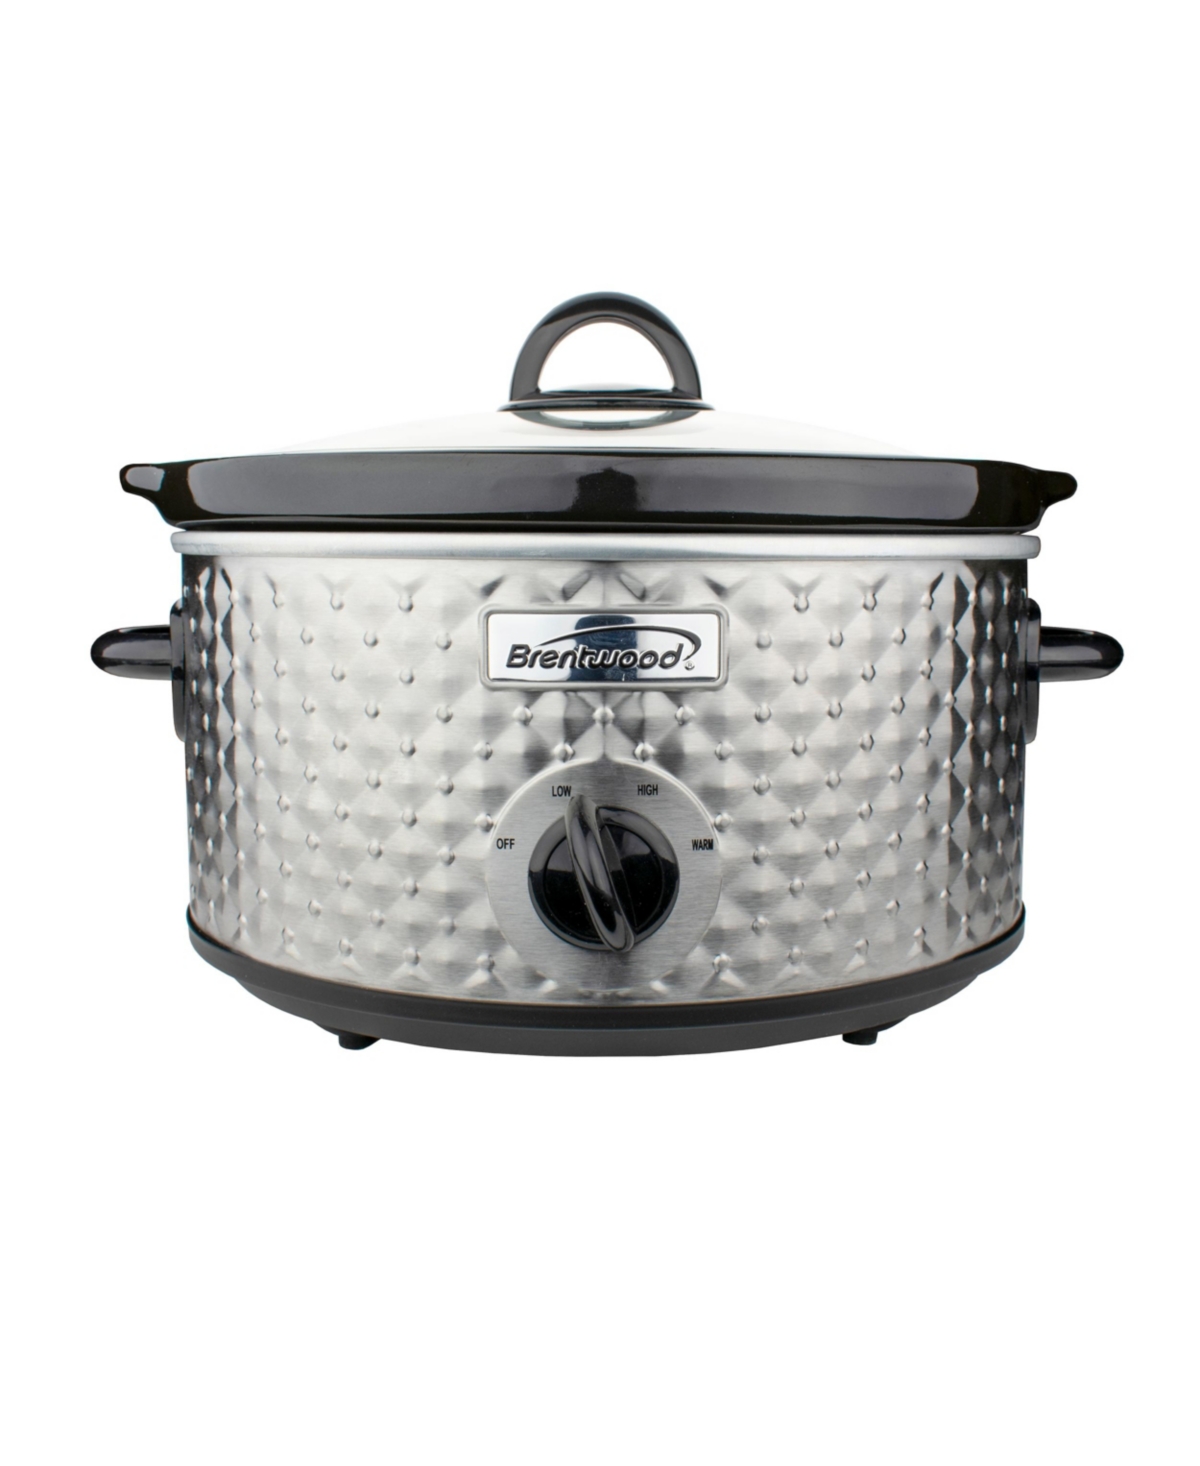 Brentwood 3.5 Quart Diamond Pattern Electric Slow Cooker - Silver